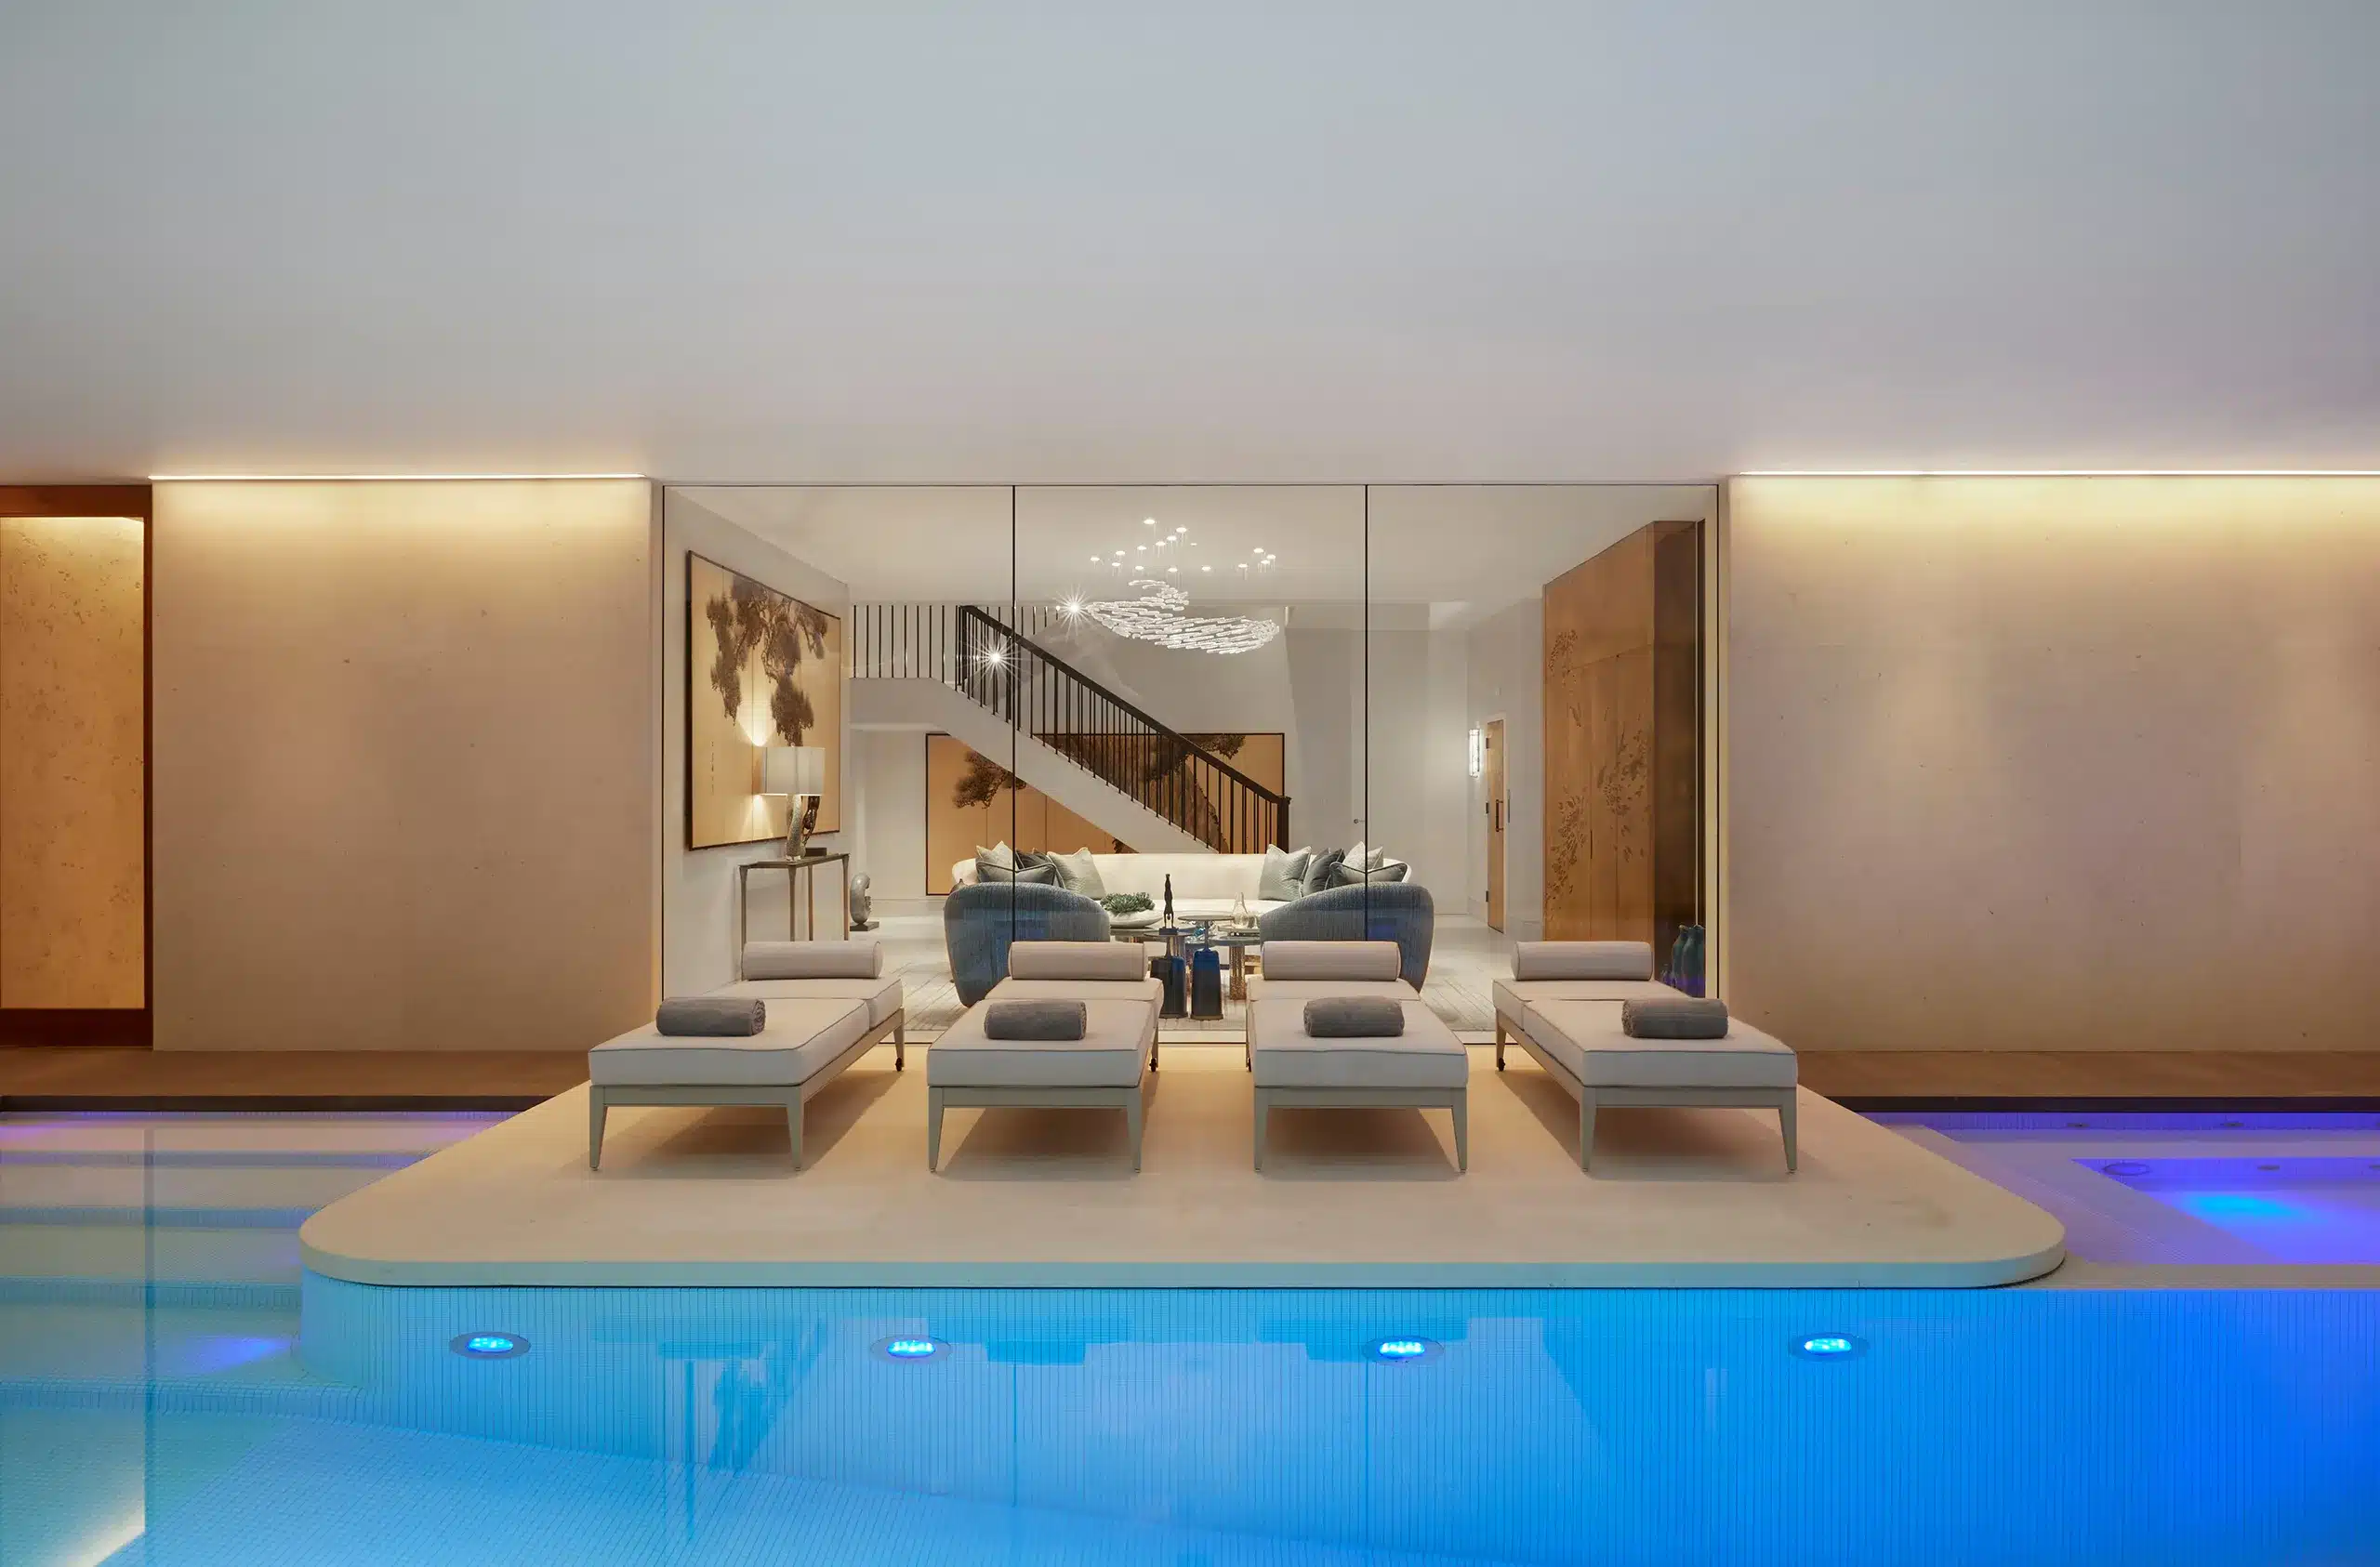 A subterranean basement with pool and spa in one of katharine pooleys luxury london projects